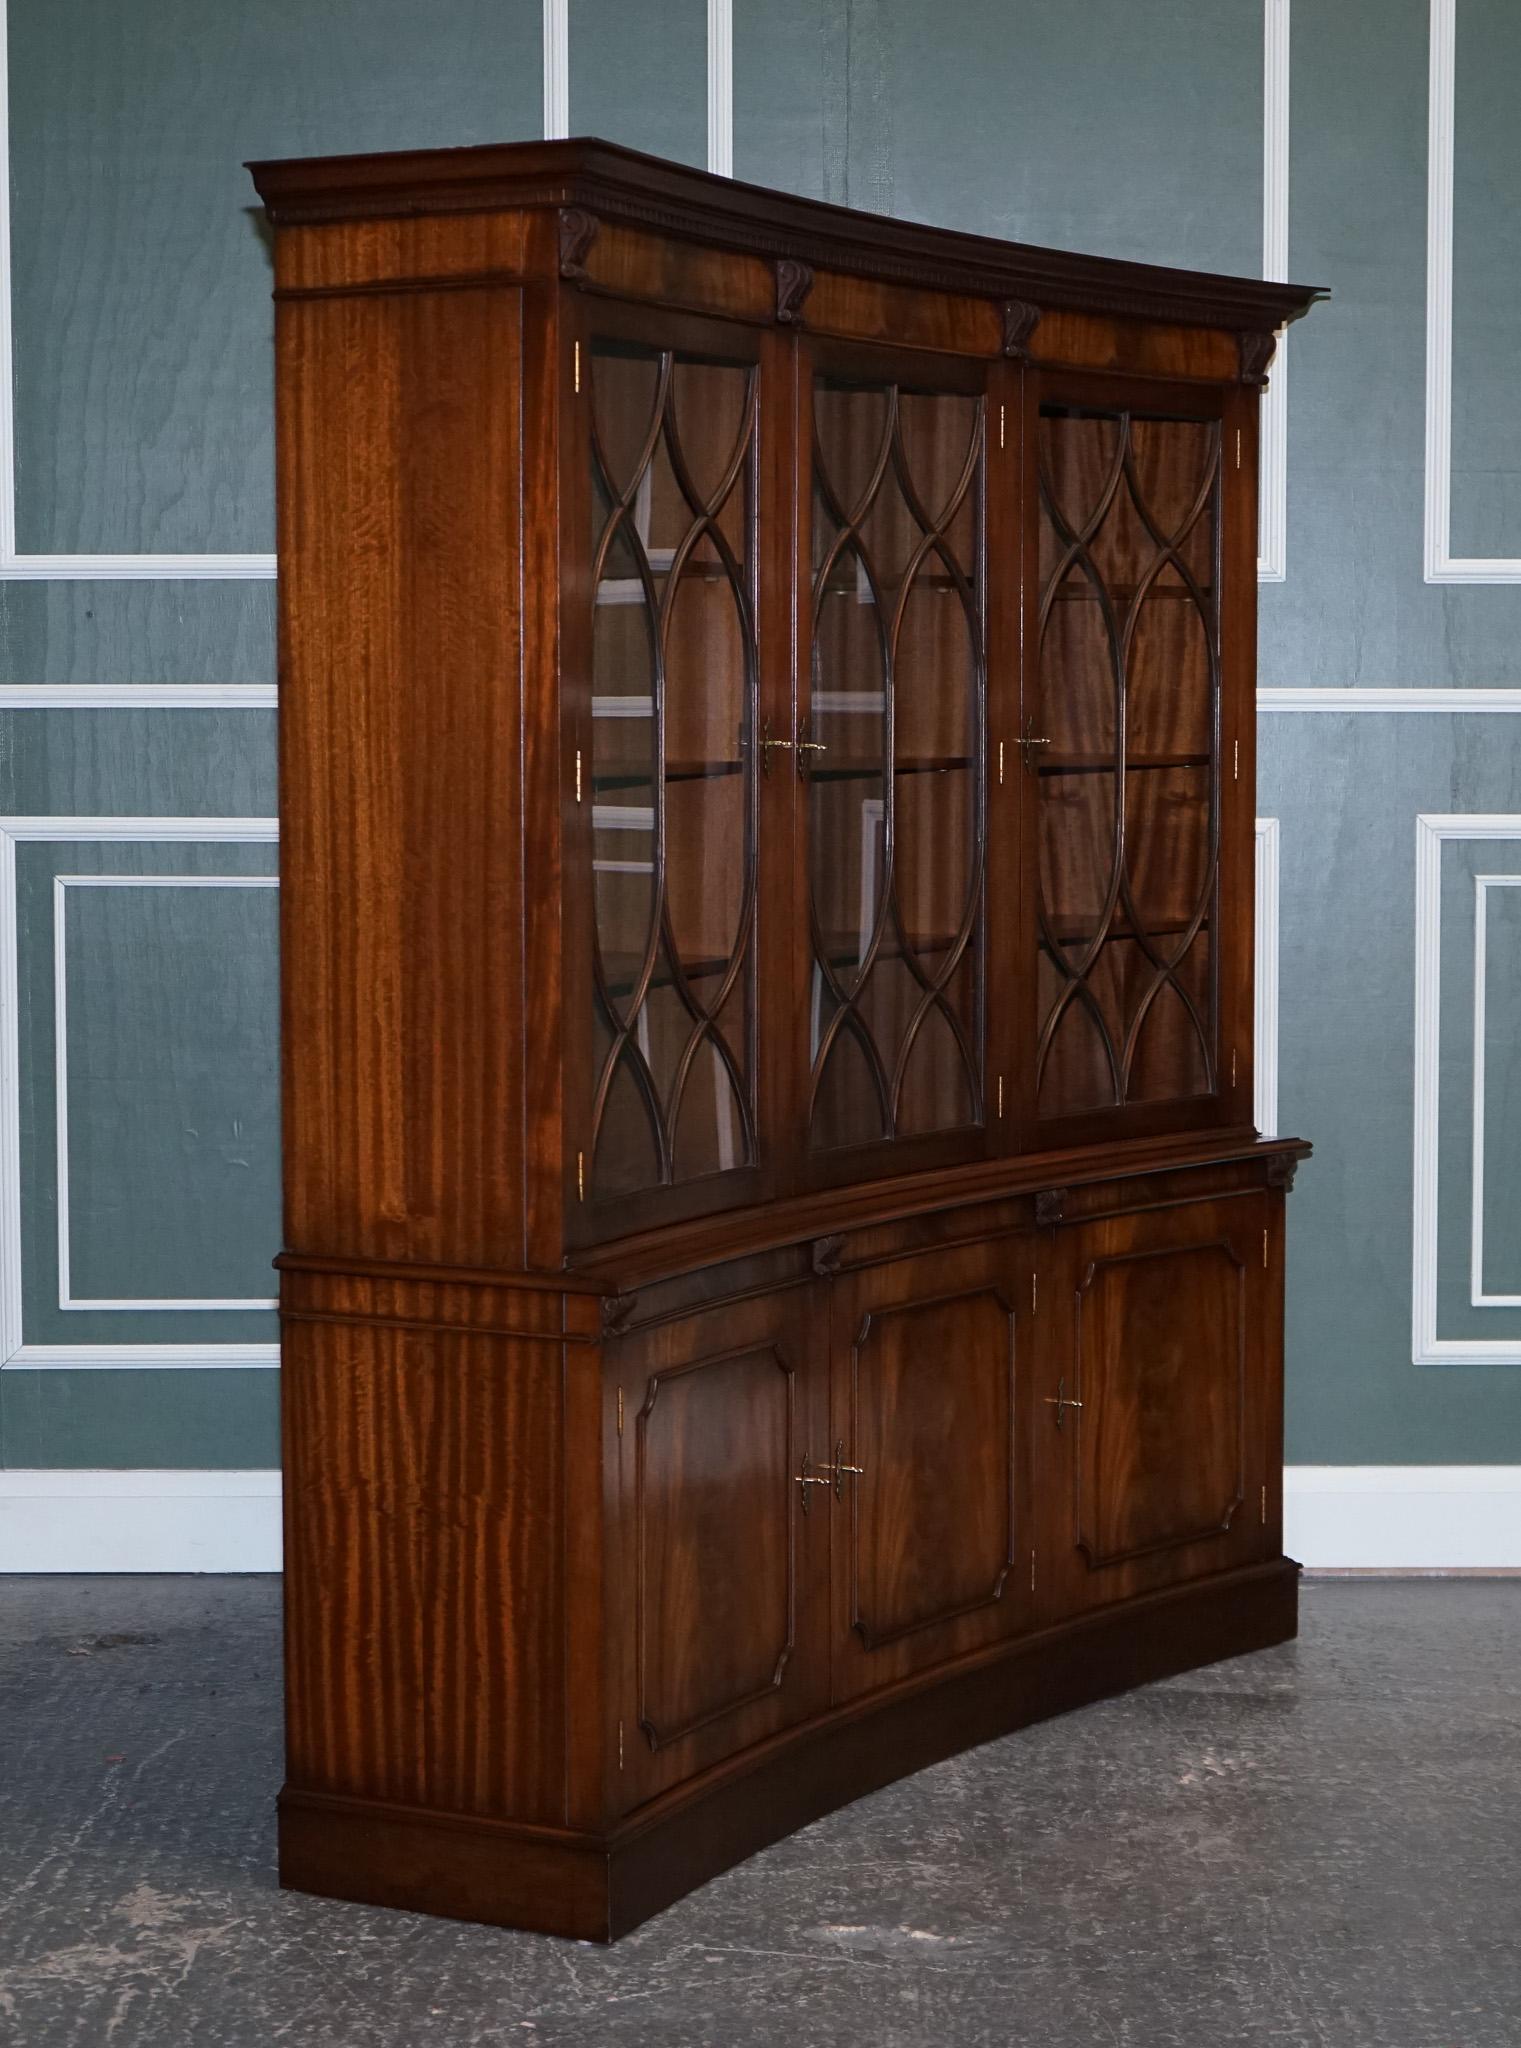 We are delighted to offer for sale this lovely Bevan Funnell Astral Glazed Bookcase.

We have lightly restored this by cleaning it, waxing and hand polishing.

Please carefully examine the pictures to see the condition before purchasing, as they